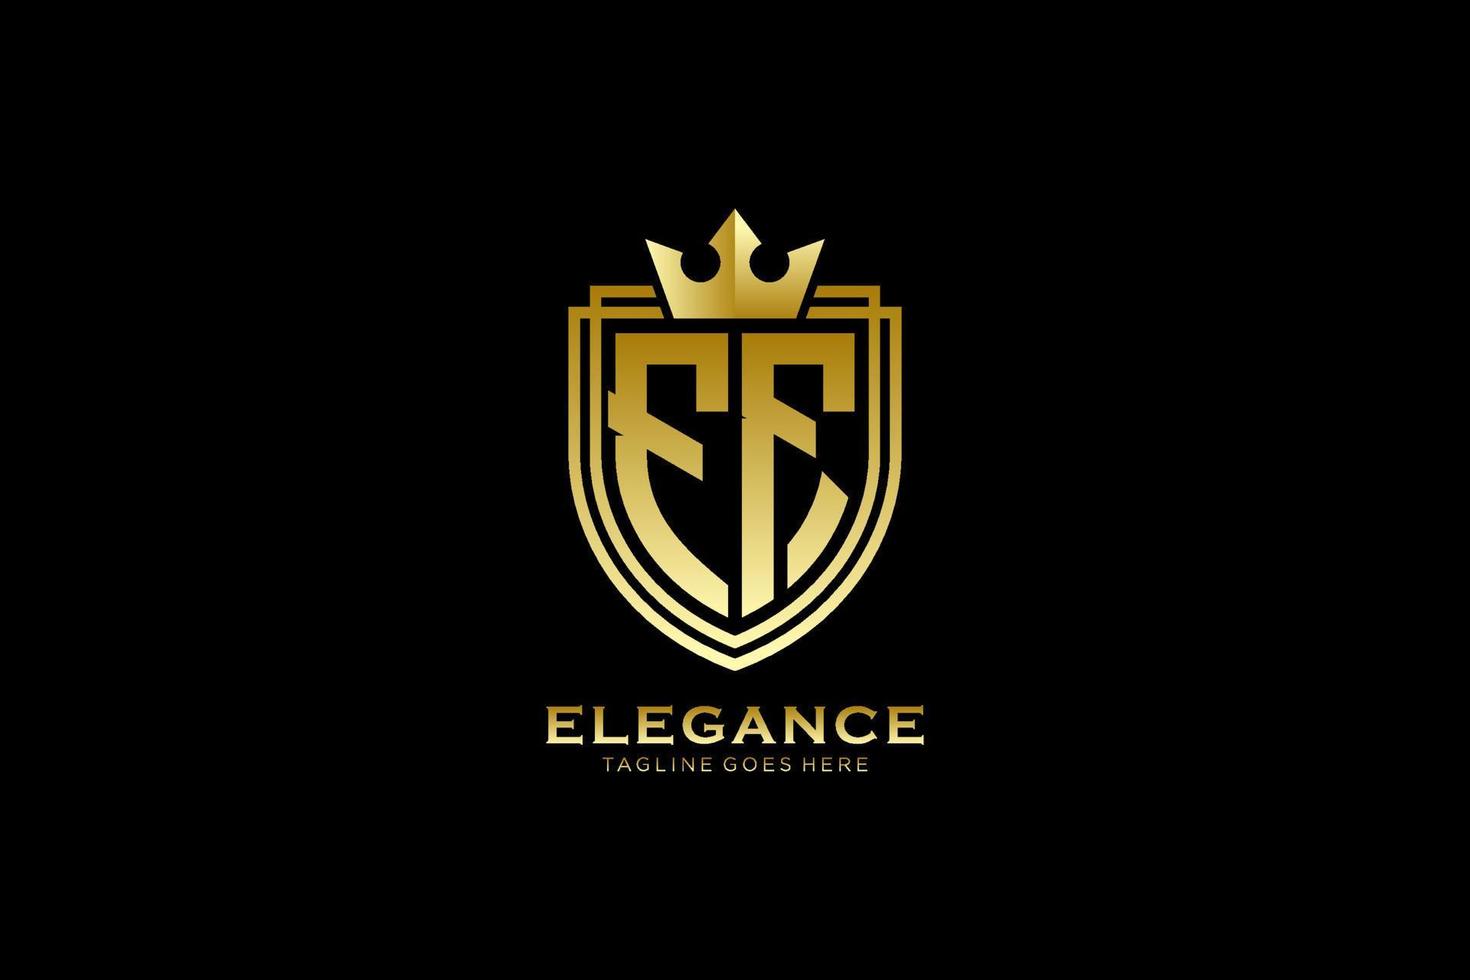 initial FF elegant luxury monogram logo or badge template with scrolls and royal crown - perfect for luxurious branding projects vector